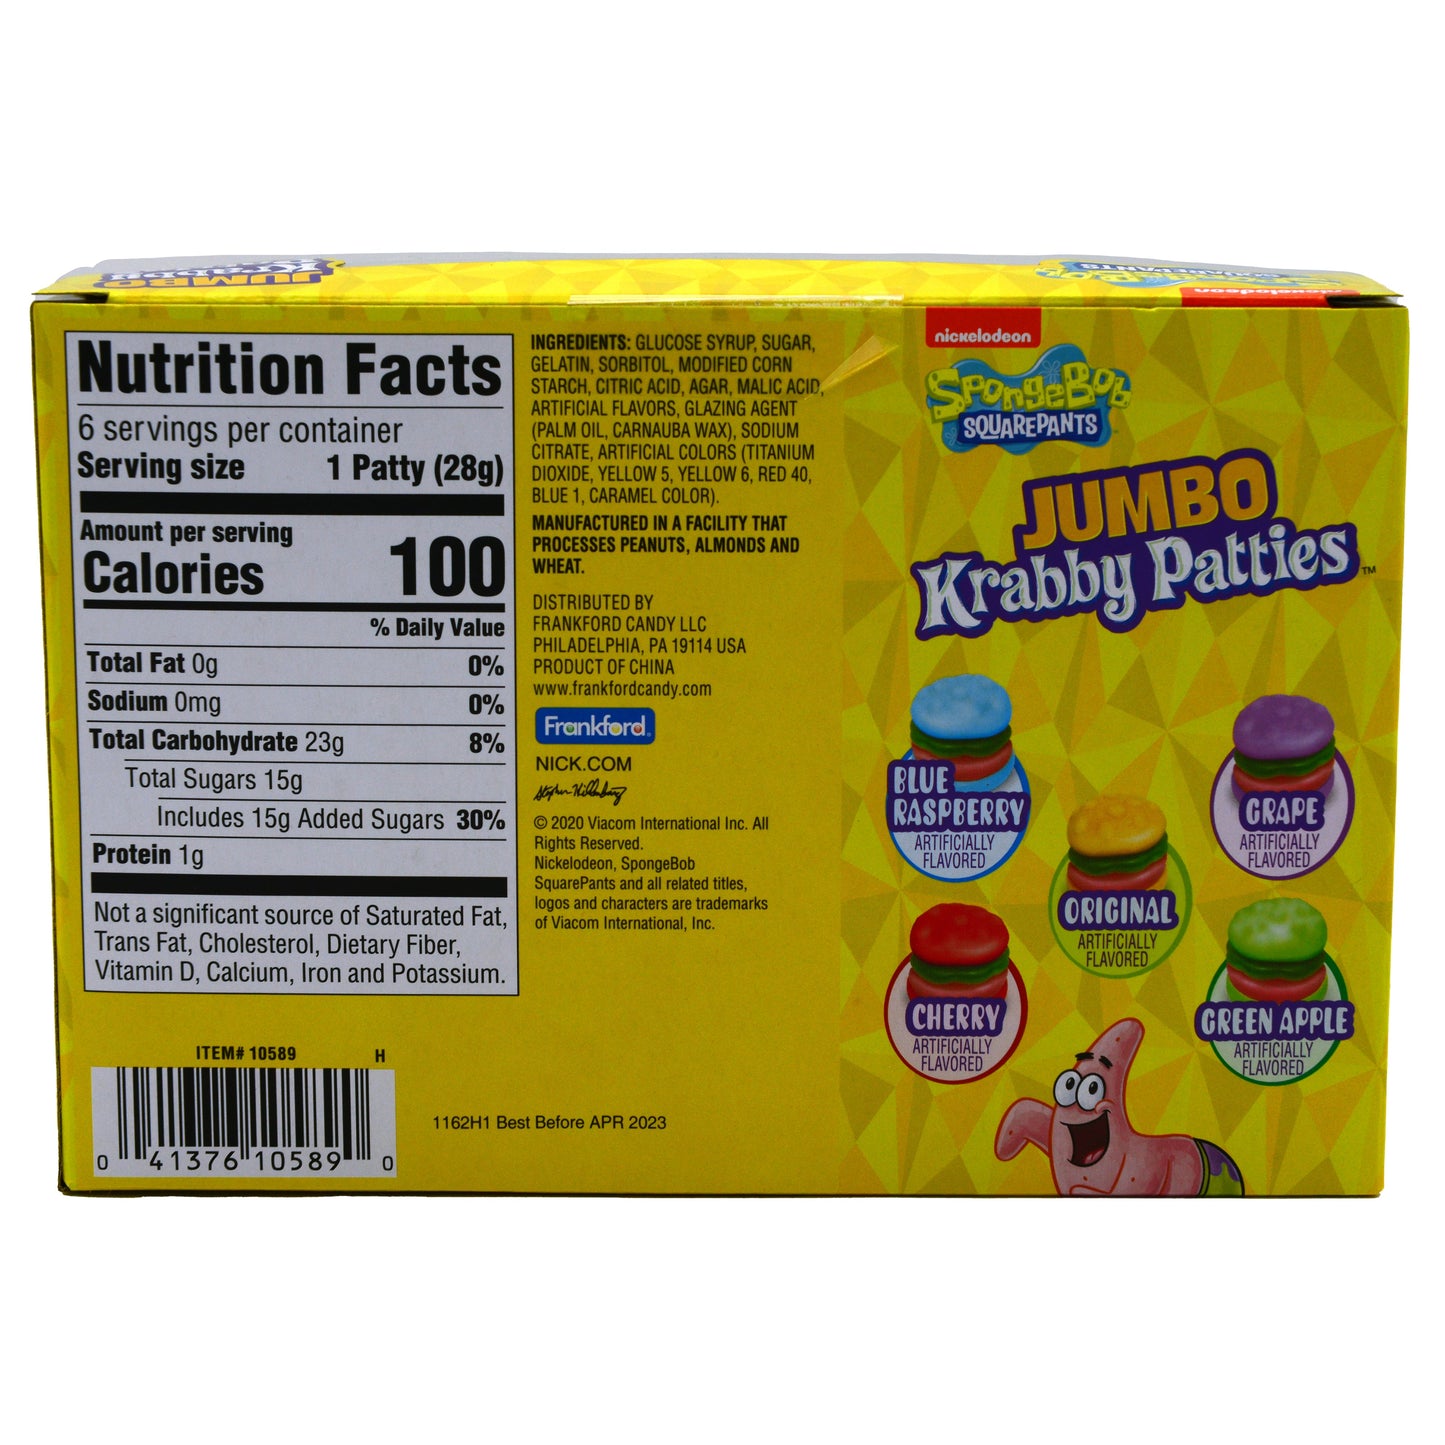 back of yellow box with colors and flavors, nutrition facts, and ingredients